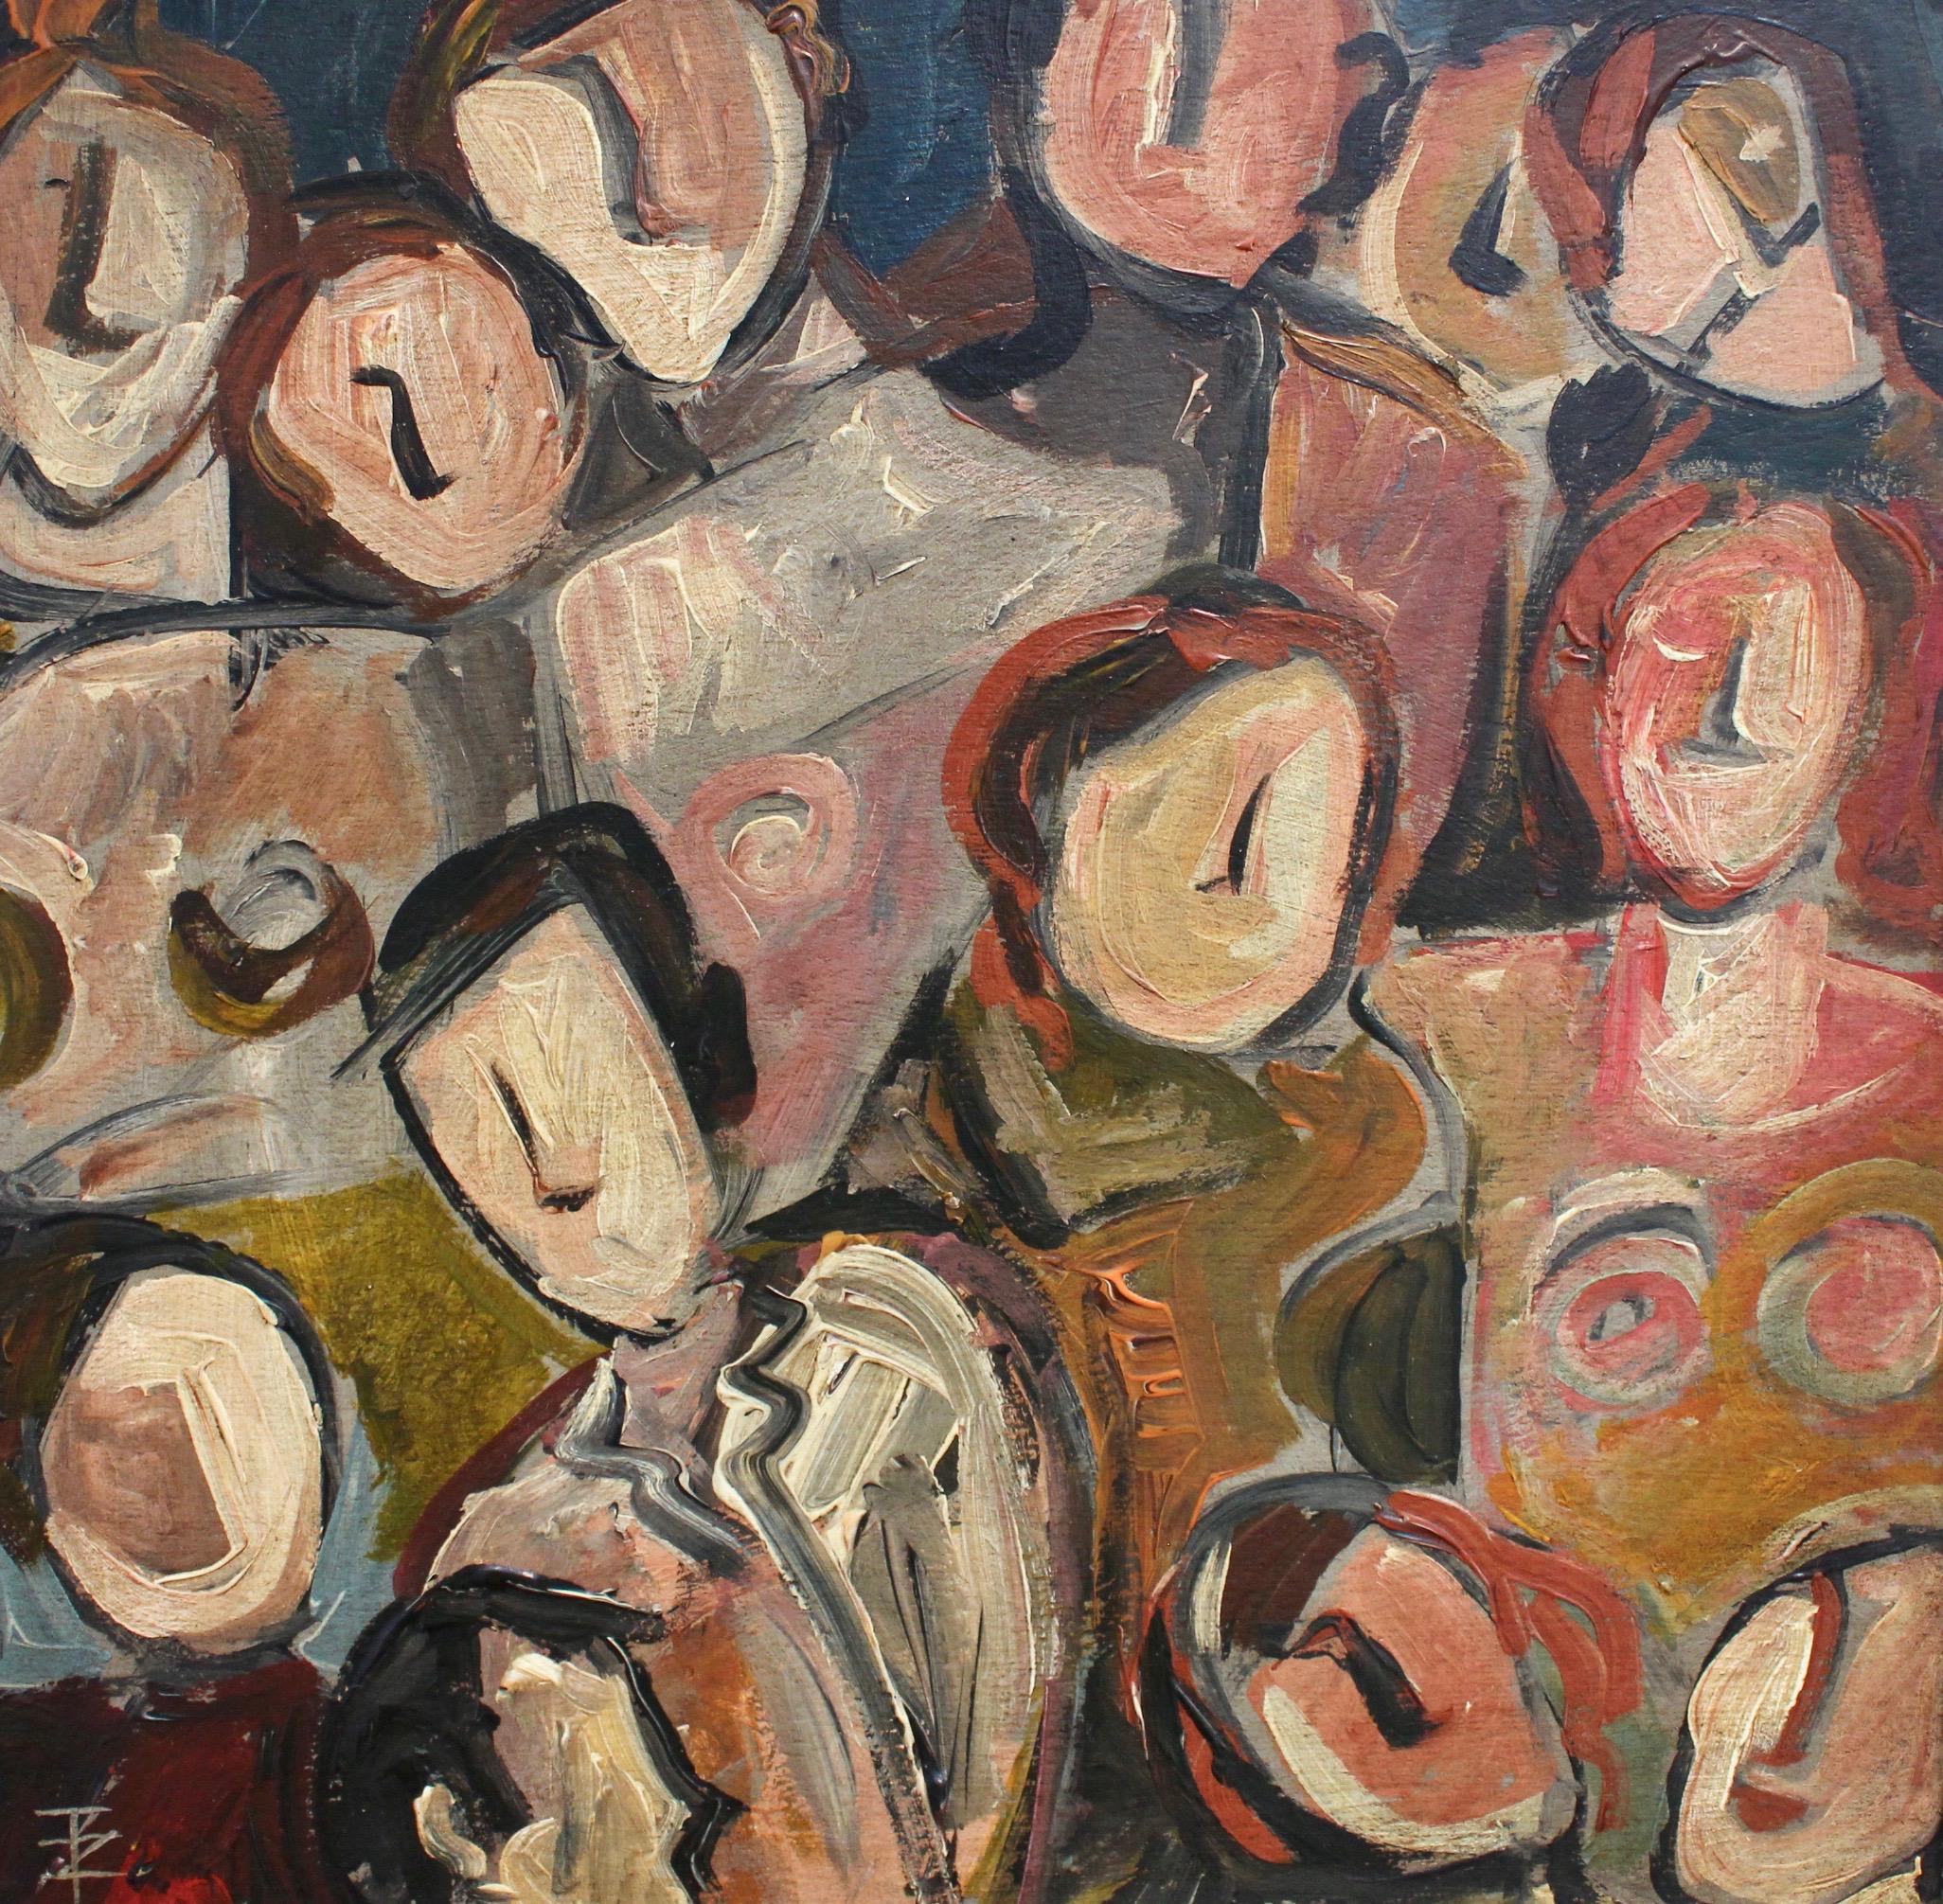 Unknown Portrait Painting - 'The Gathering', Berlin School, Initialed 'TZ' 